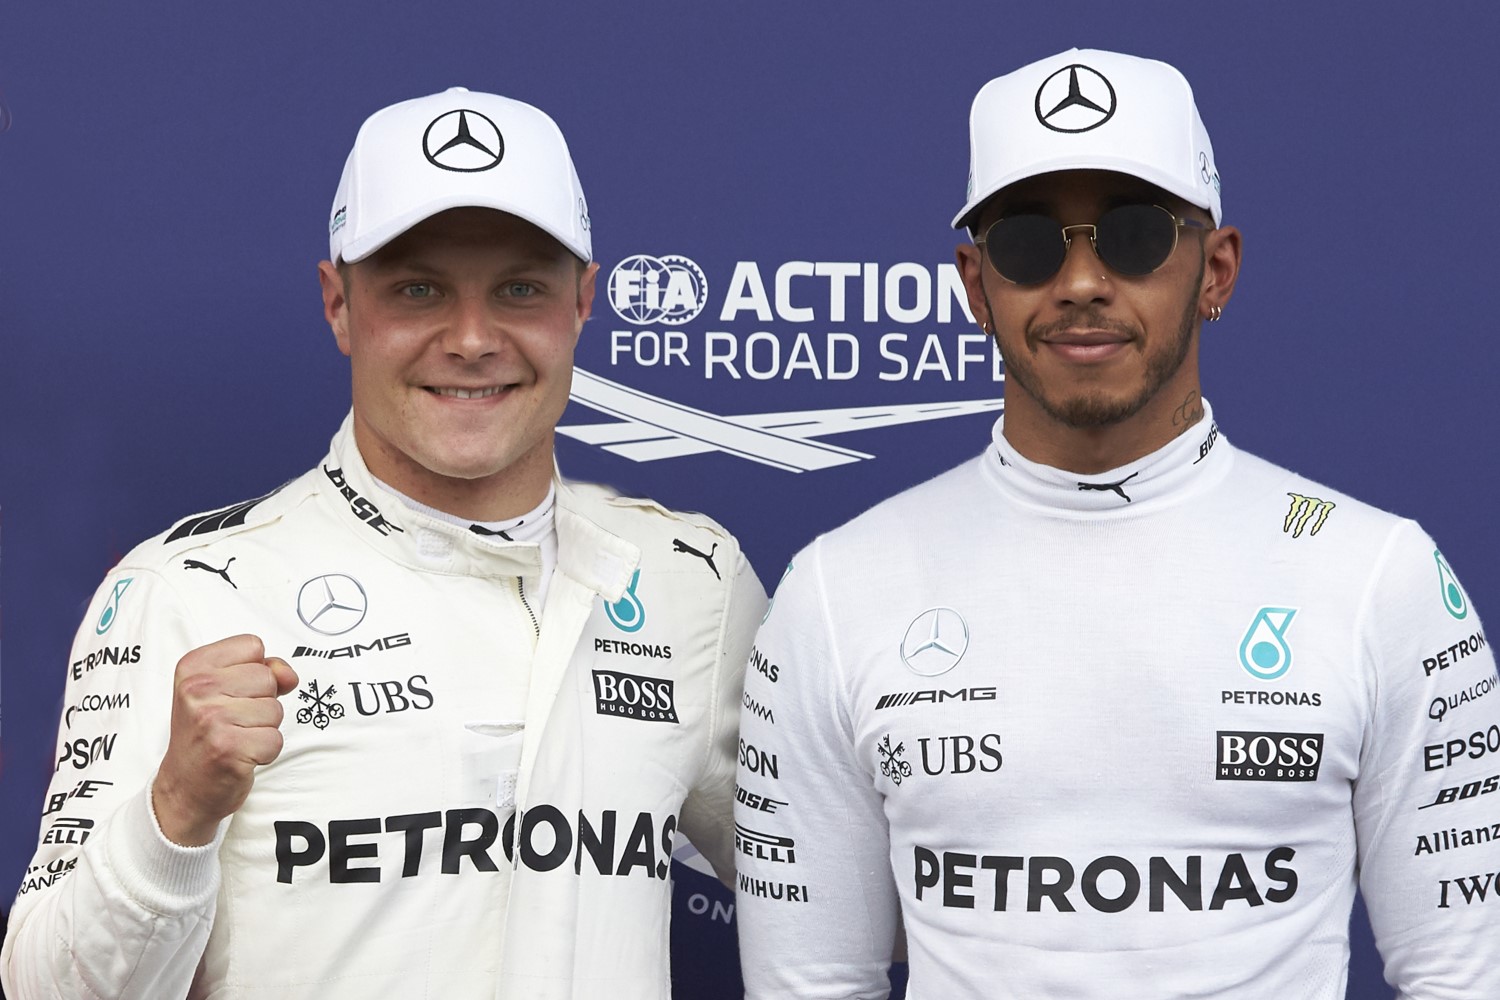 Of course Bottas will try to backup Vettel, but he would never admit it to the media. He will do whatever Mercedes wants him to do to keep his job.